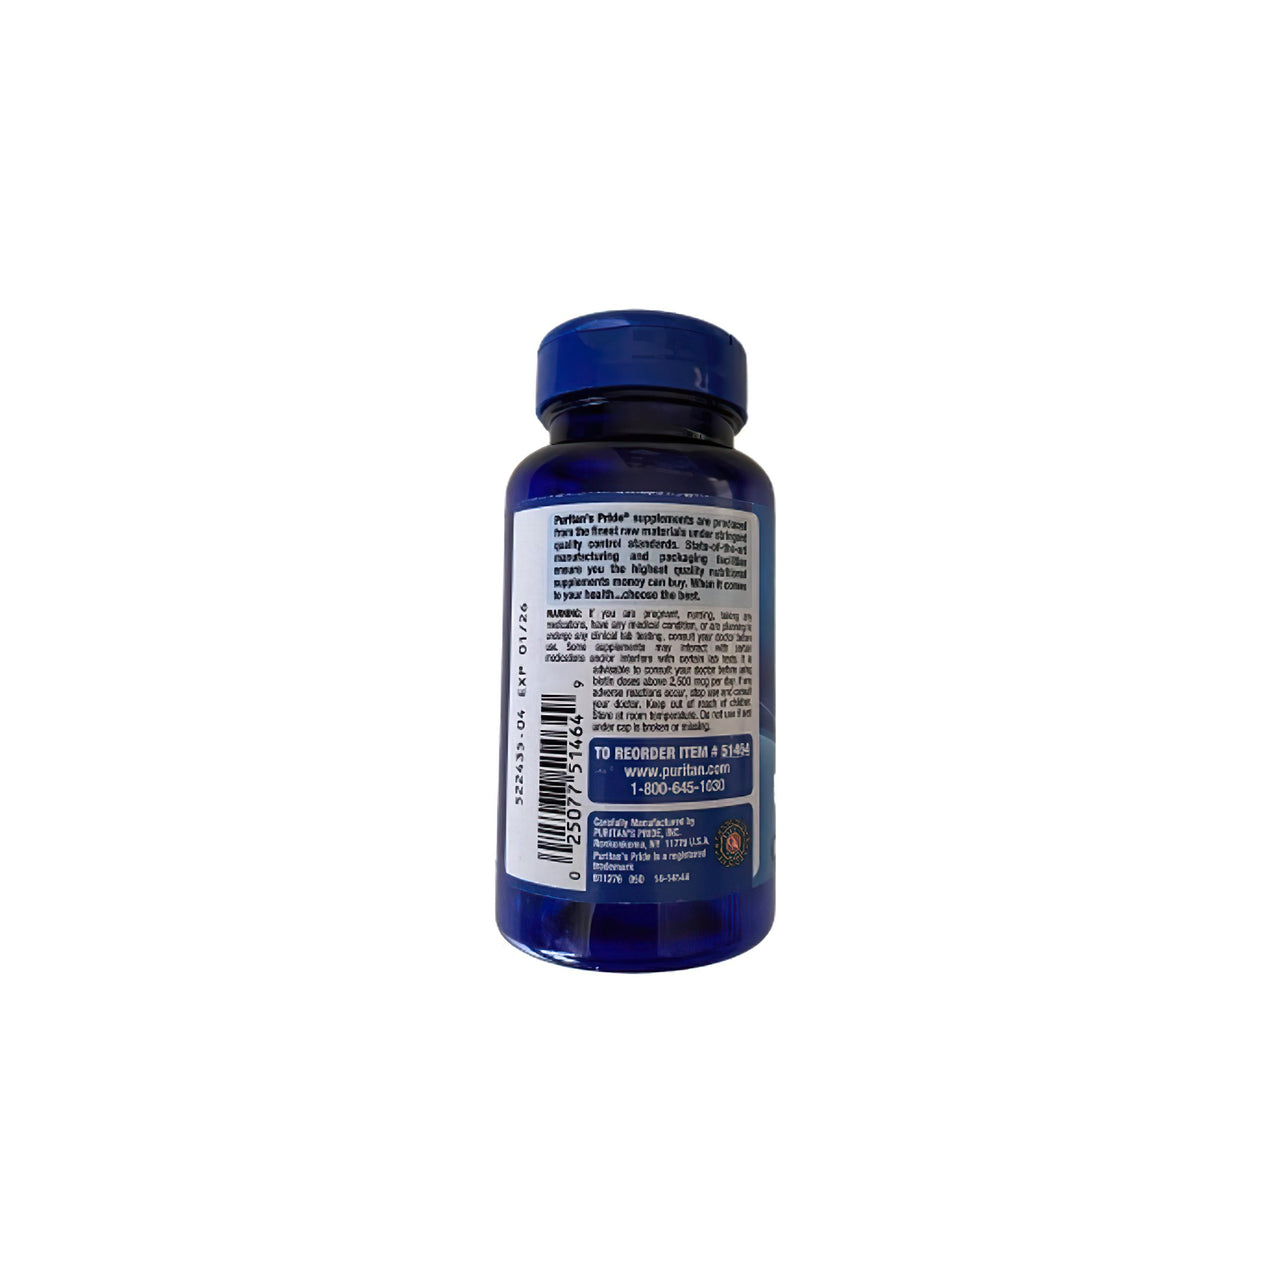 A blue bottle with a white label, containing Puritan's Pride Biotin - 10000 mcg 100 softgels for healthy hair.